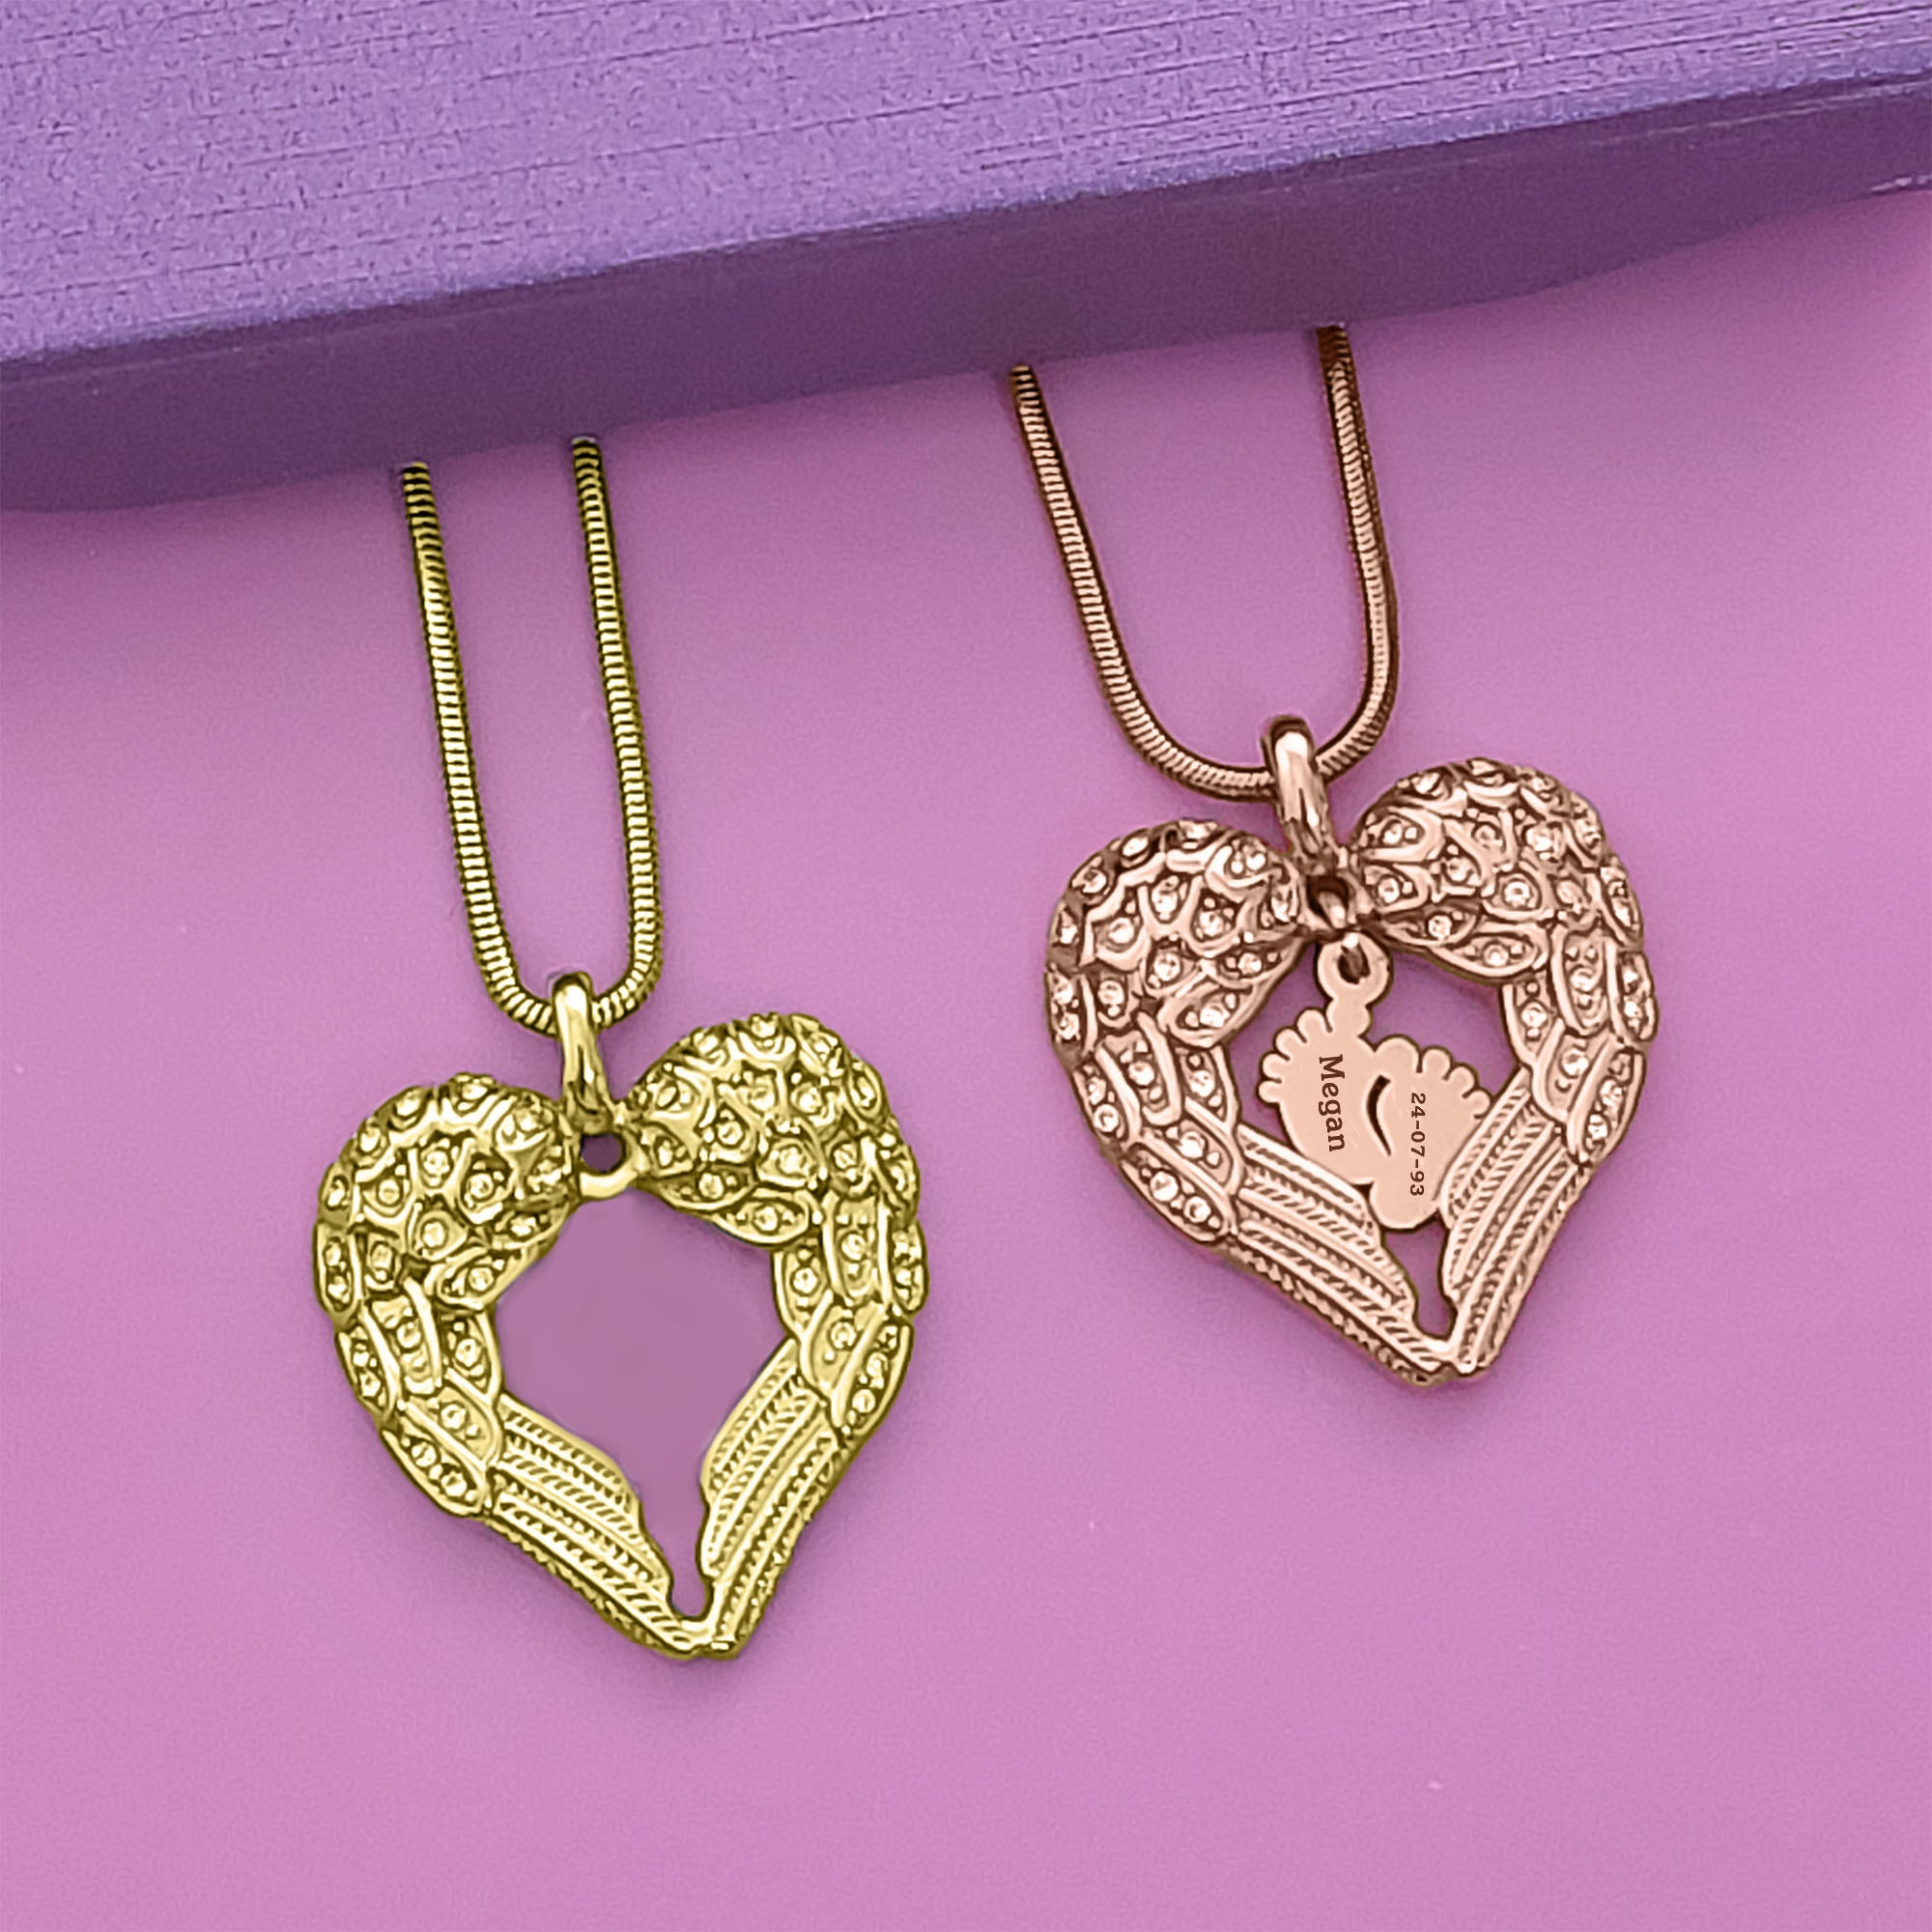 BUY ONE GET ONE Angels Heart Necklace - Deal